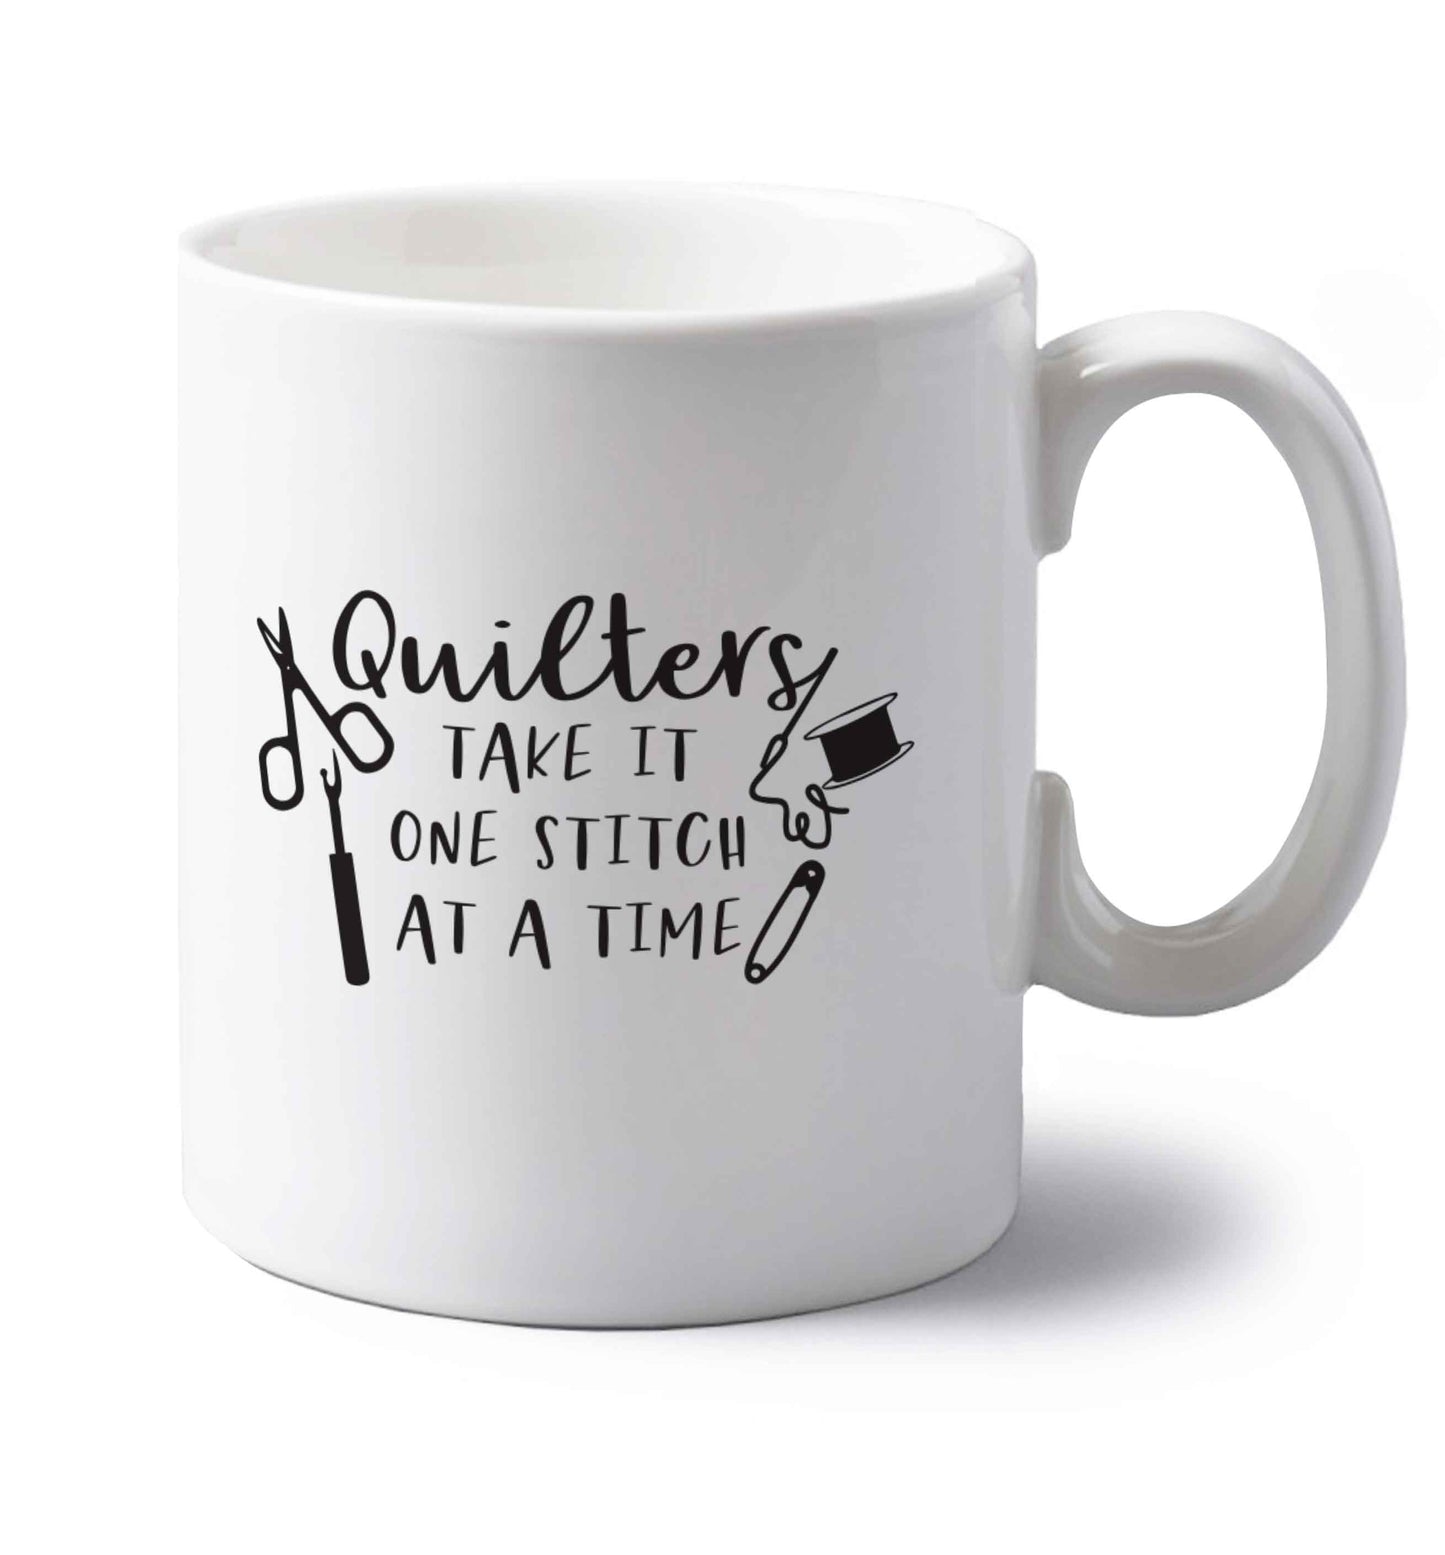 Quilters take it one stitch at a time  left handed white ceramic mug 